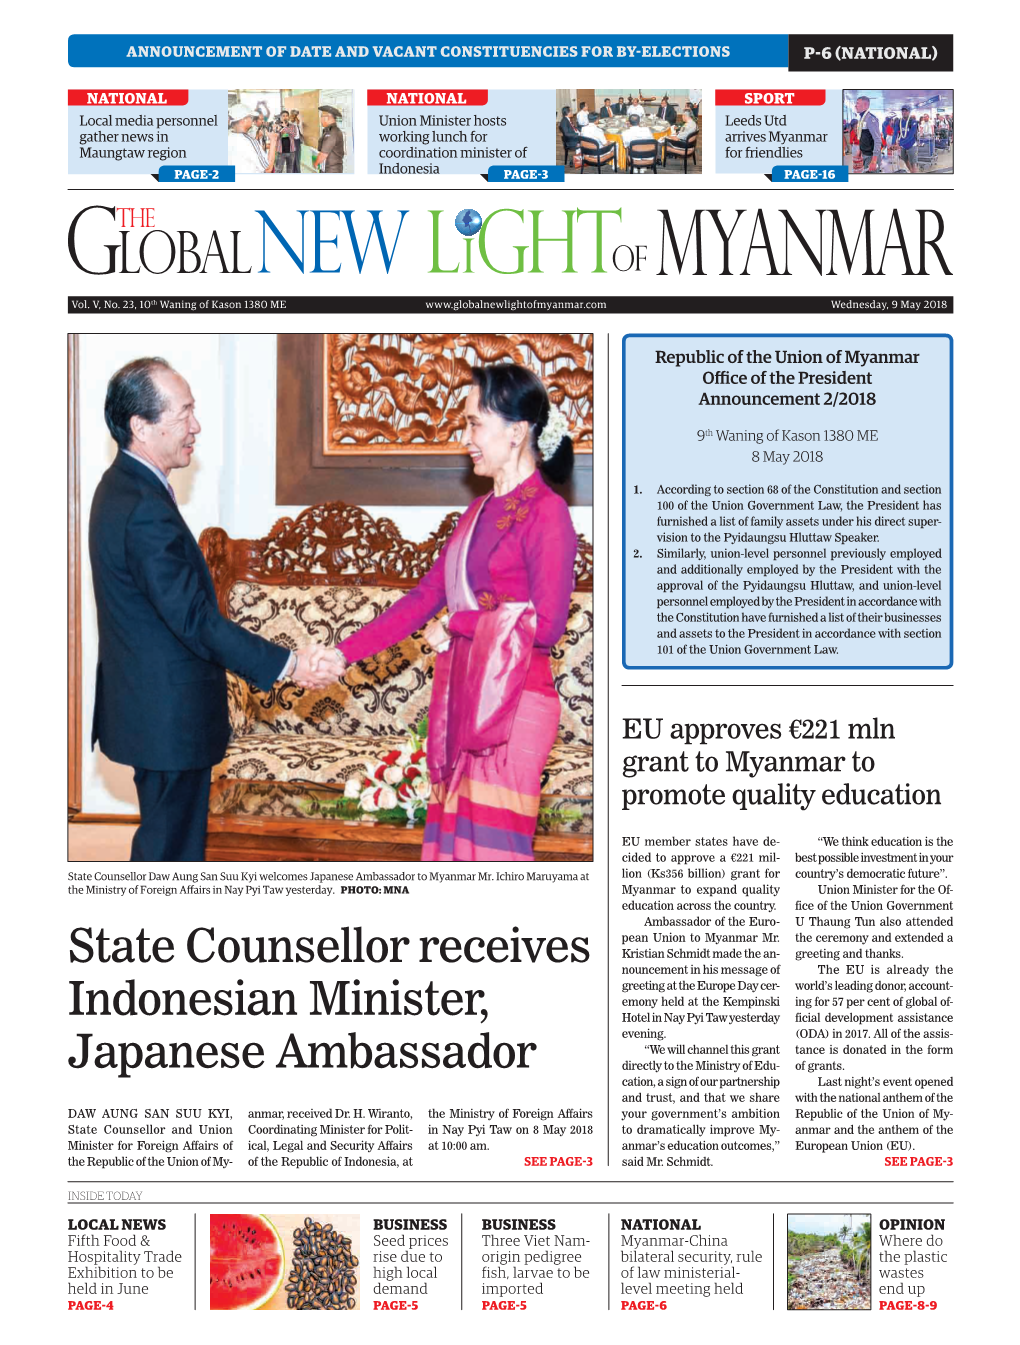 State Counsellor Receives Indonesian Minister, Japanese Ambassador